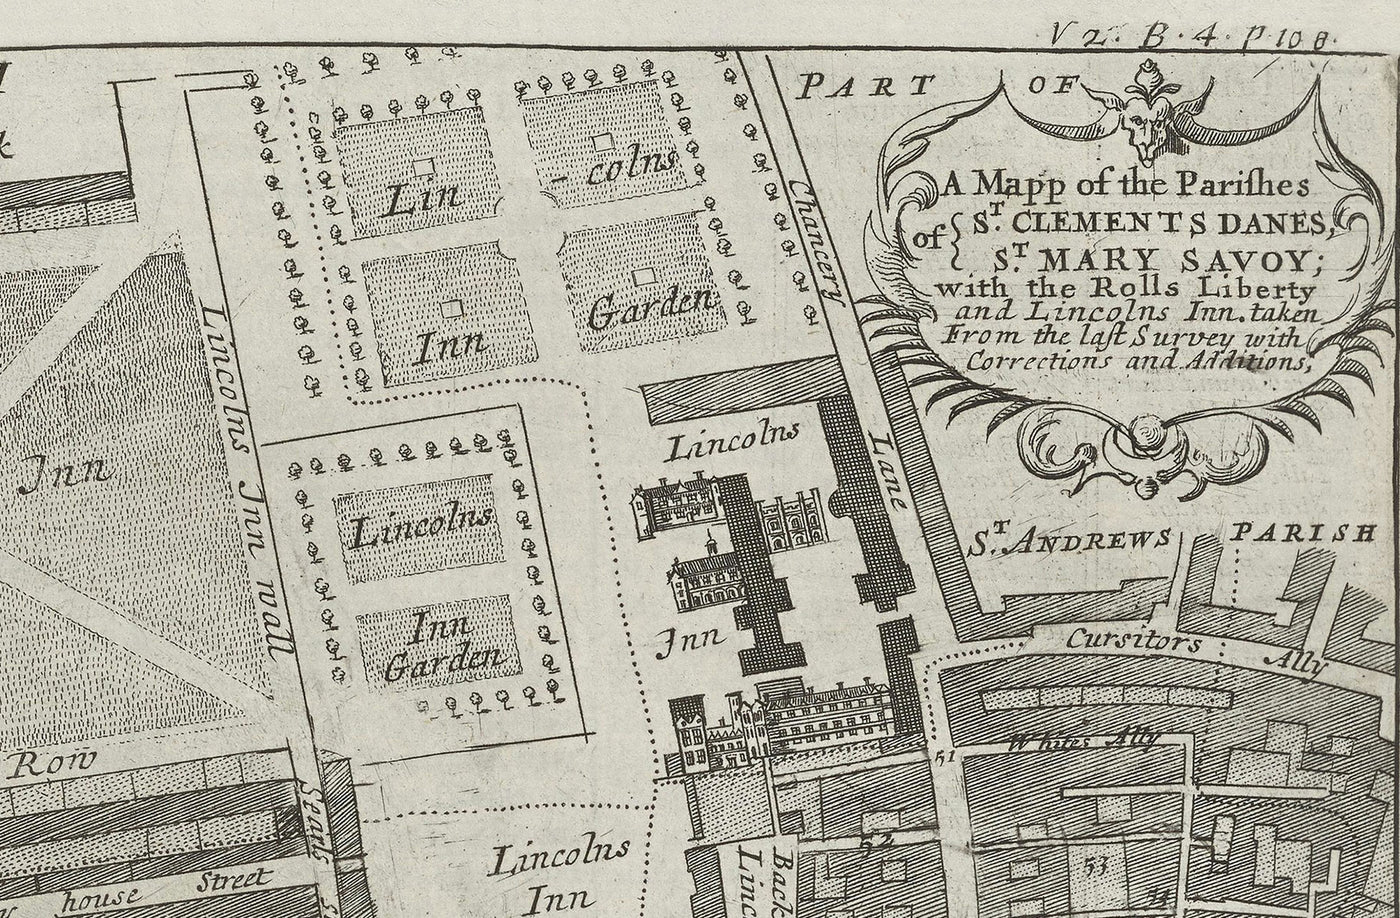 Old Map of St Mary Savoy, 1720 by Strype and Stow - London, Holborn, Strand, Fleet Street, River Thames